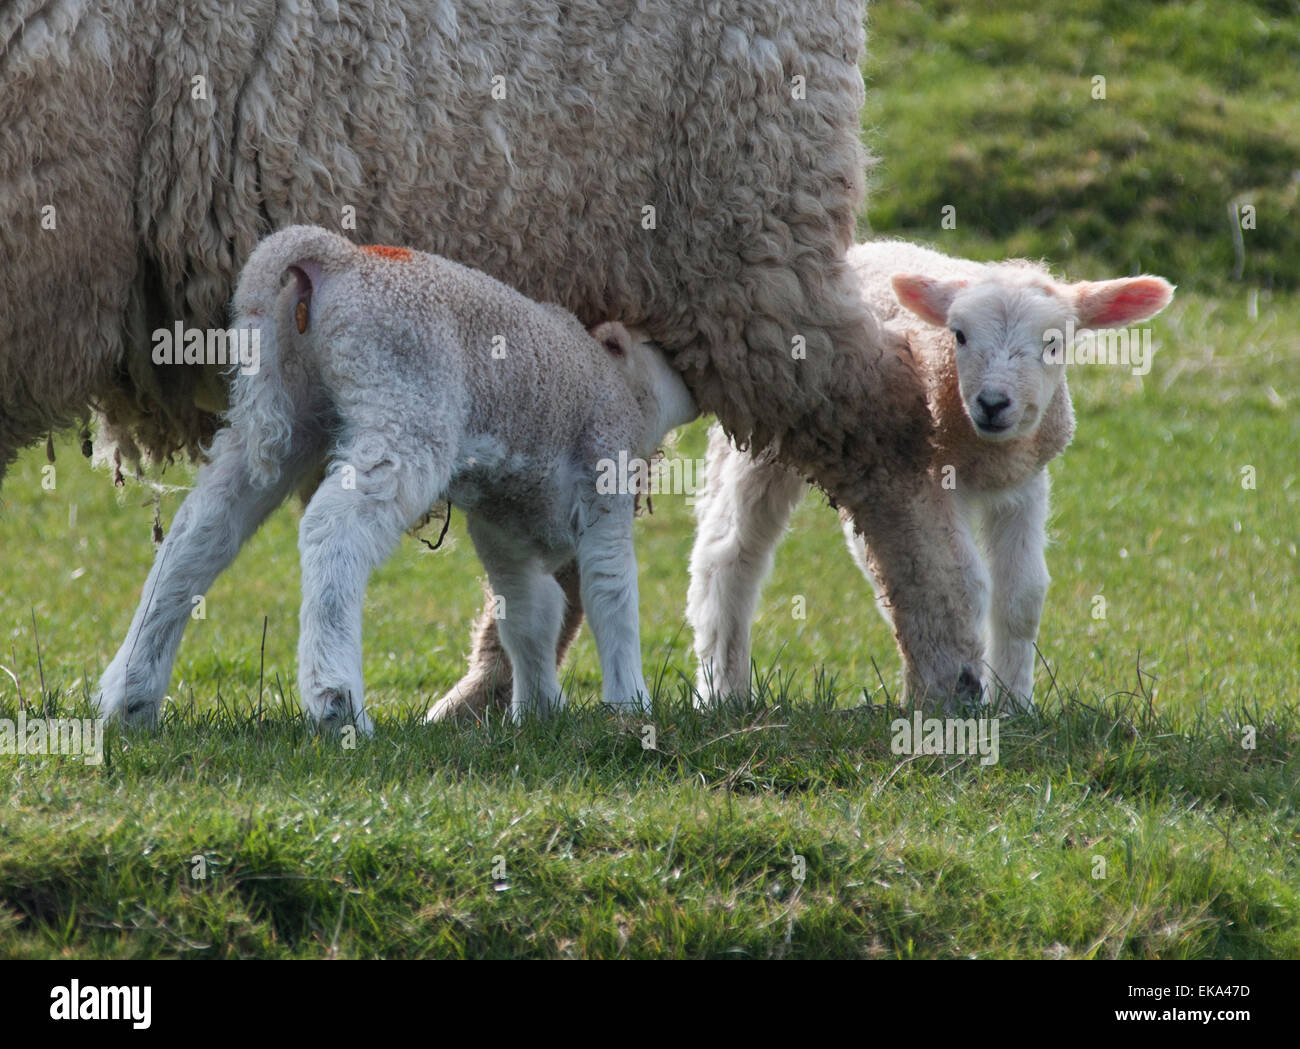 Fairfield, Romney Marsh, Kent, UK. 8th April, 2015. Lambs suckle. Am I cute or what Stock Photo